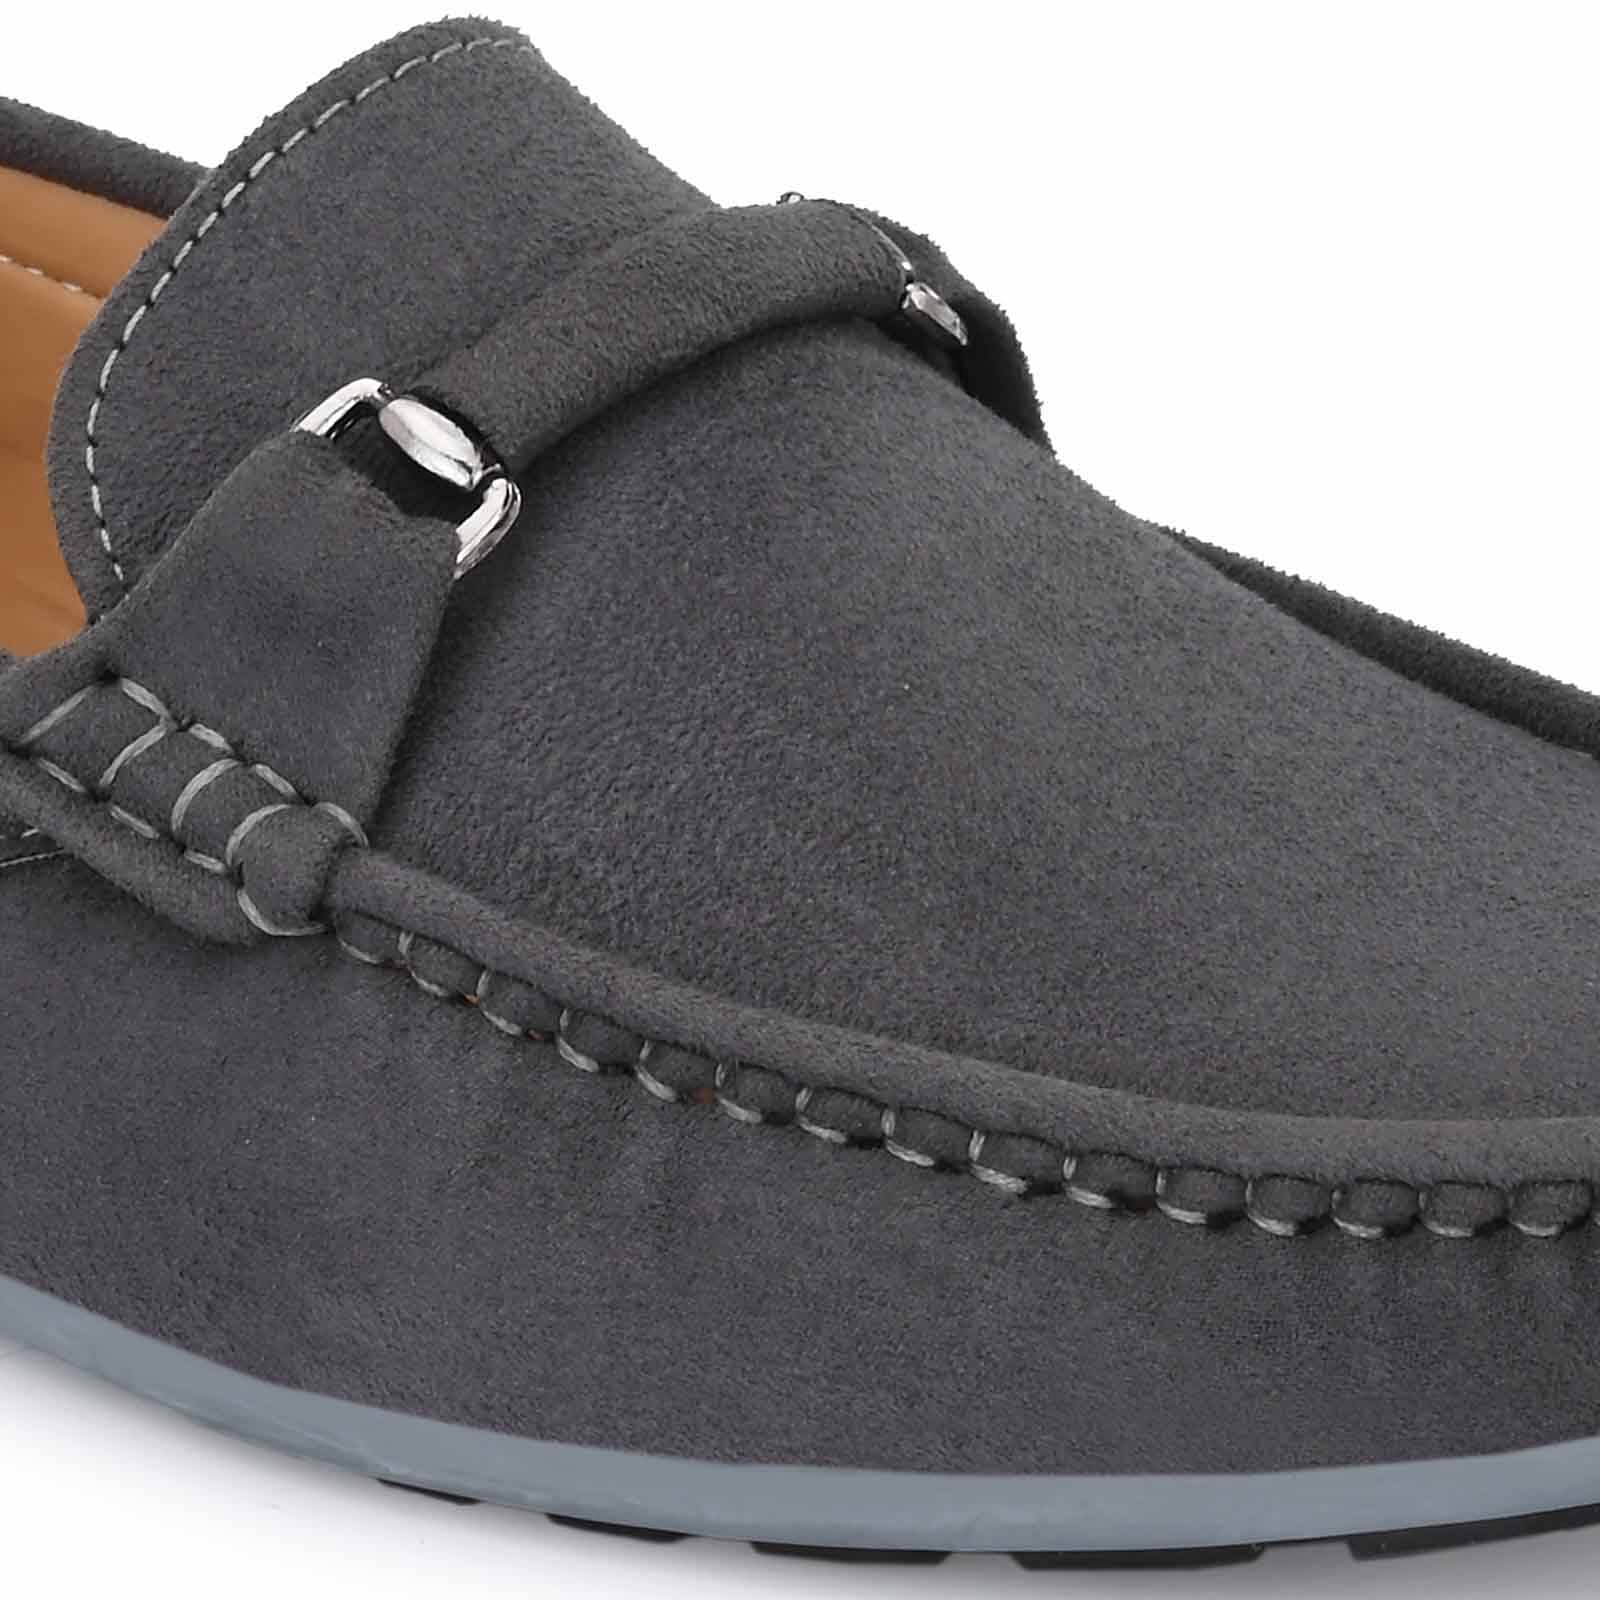 Pair-it Men's Loafers Shoes - Grey - LZ-Loafer104